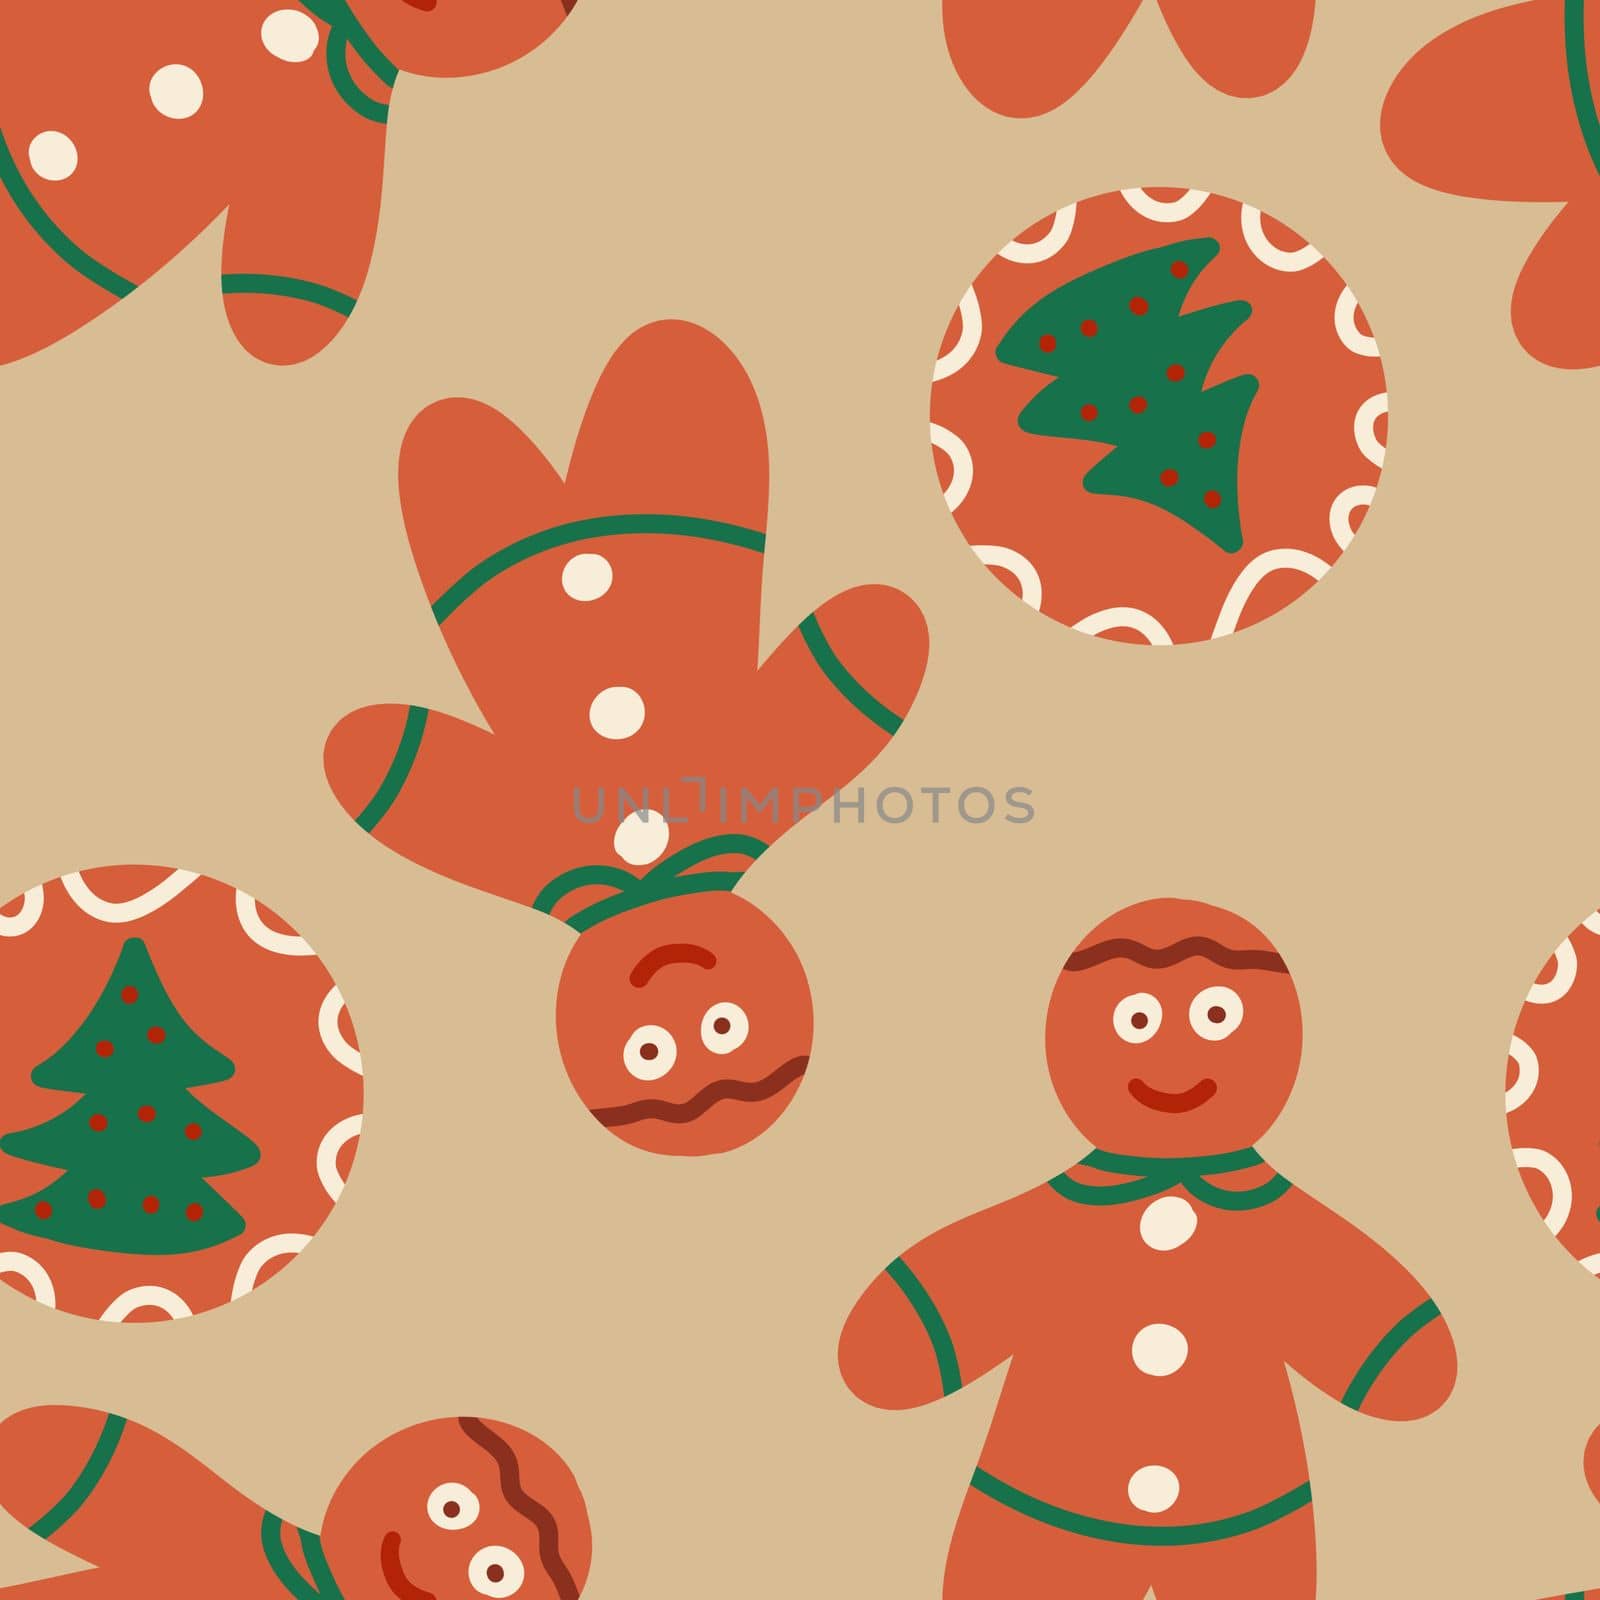 Seamless hand drawn pattern with Christmas cookies beige new year food gingerbread man wreath bows. Celebration cuisine snacks in red green traditional colors. Funny winter background